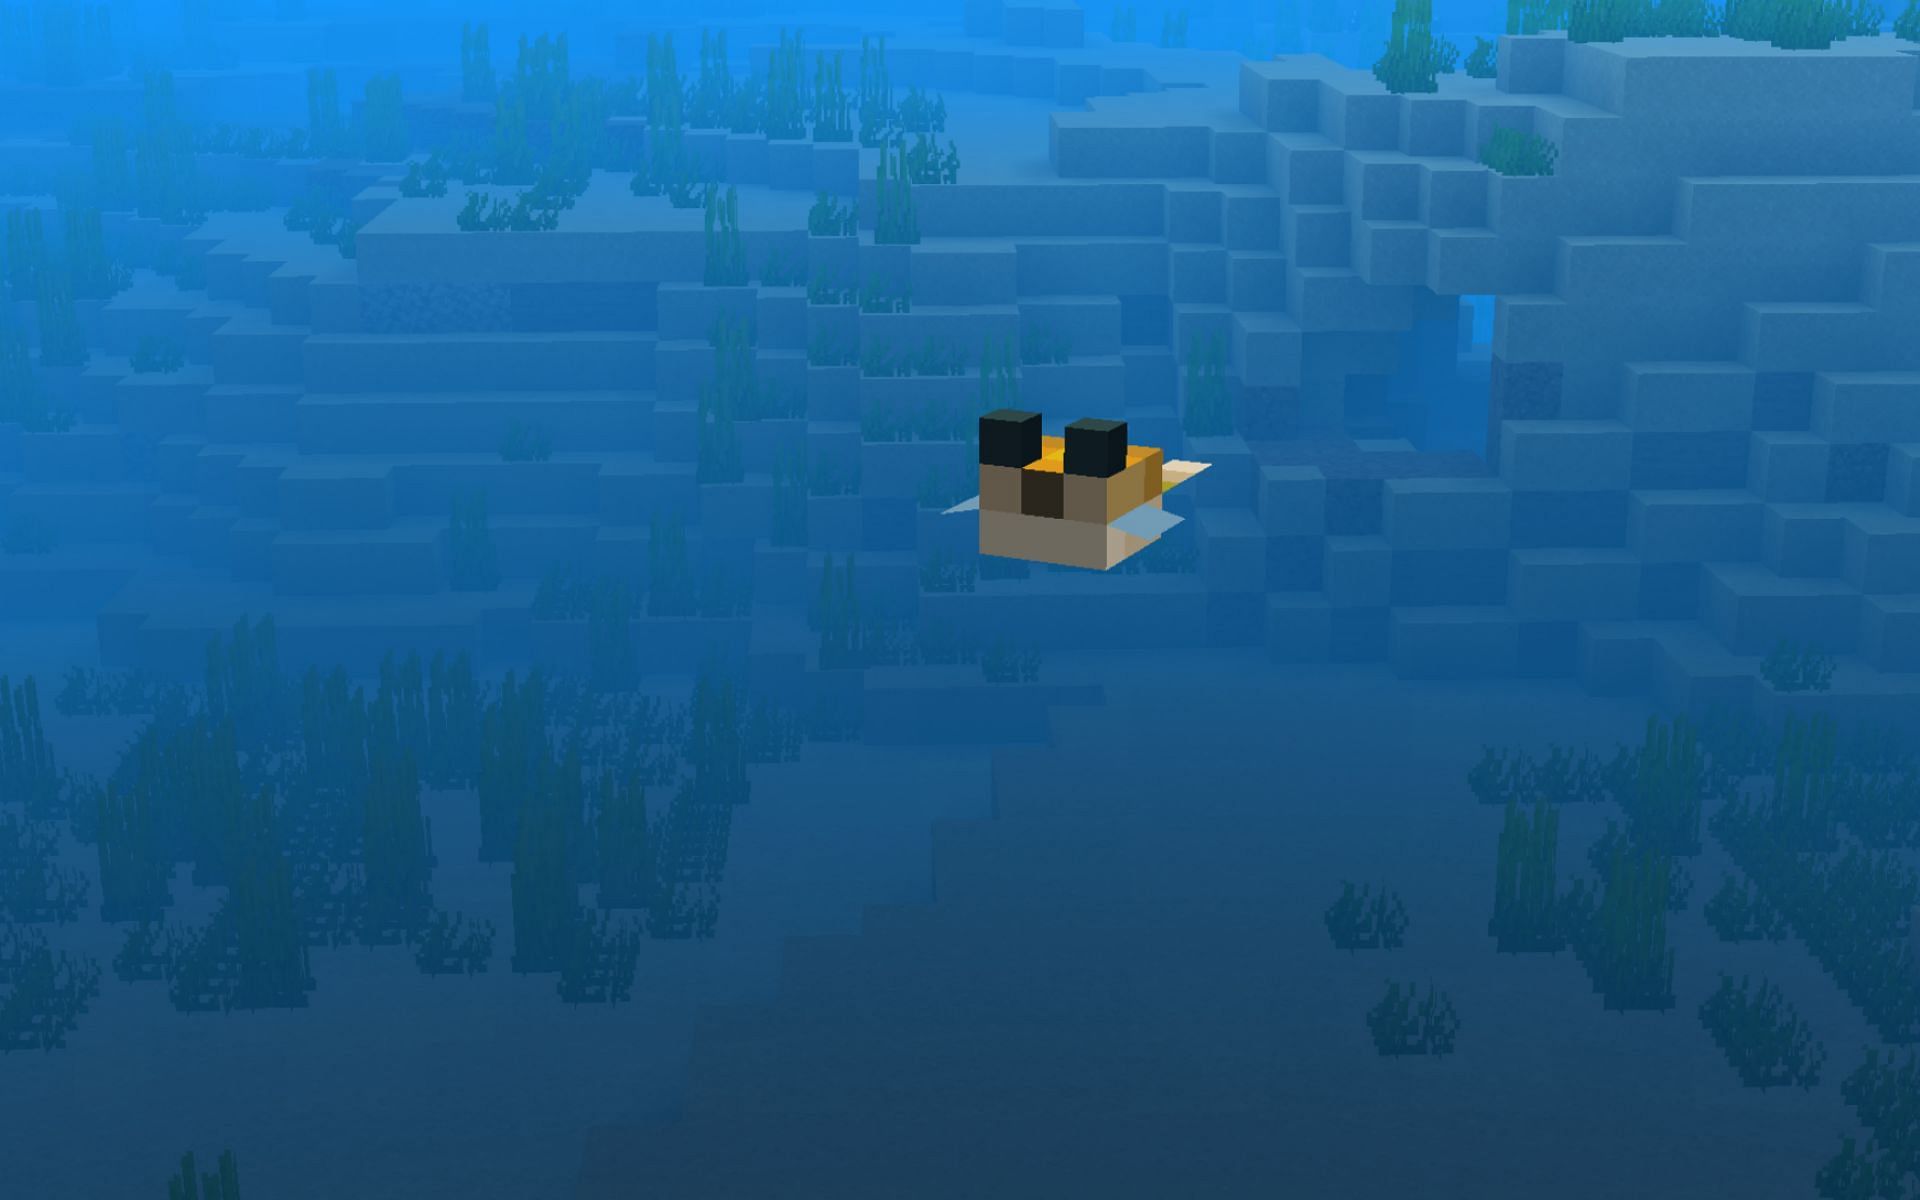 Pufferfish in a passive state (Image via Minecraft)